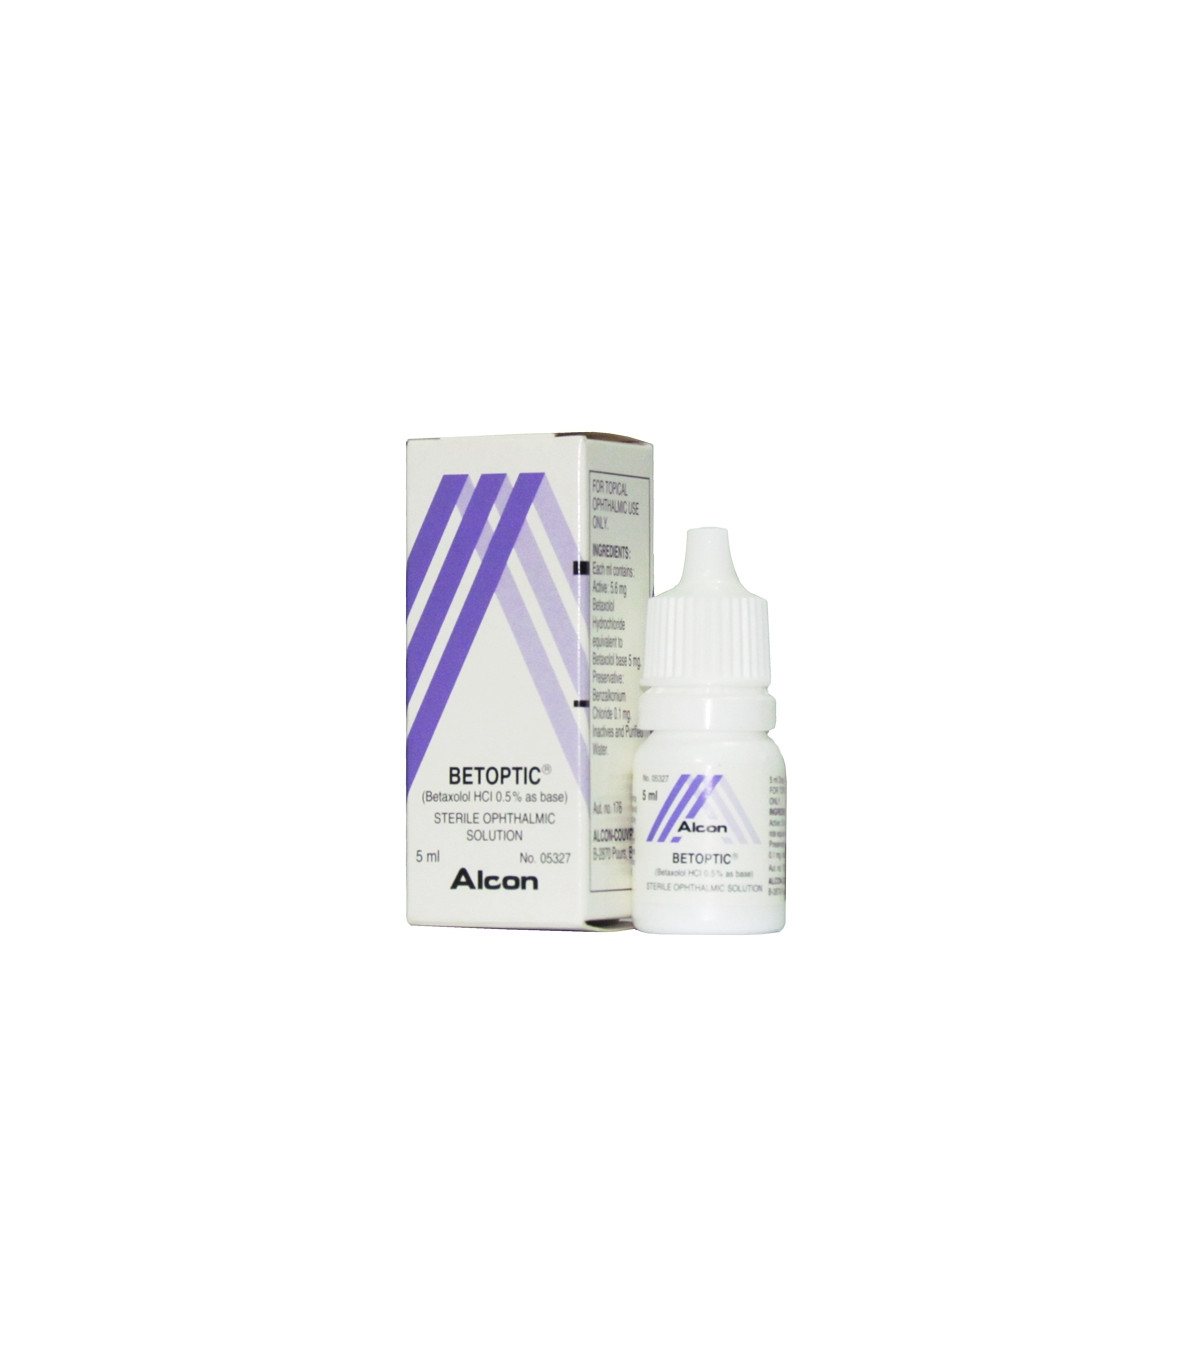 Betoptic 0.5% Sterile Ophthalmic Solution - 5ml